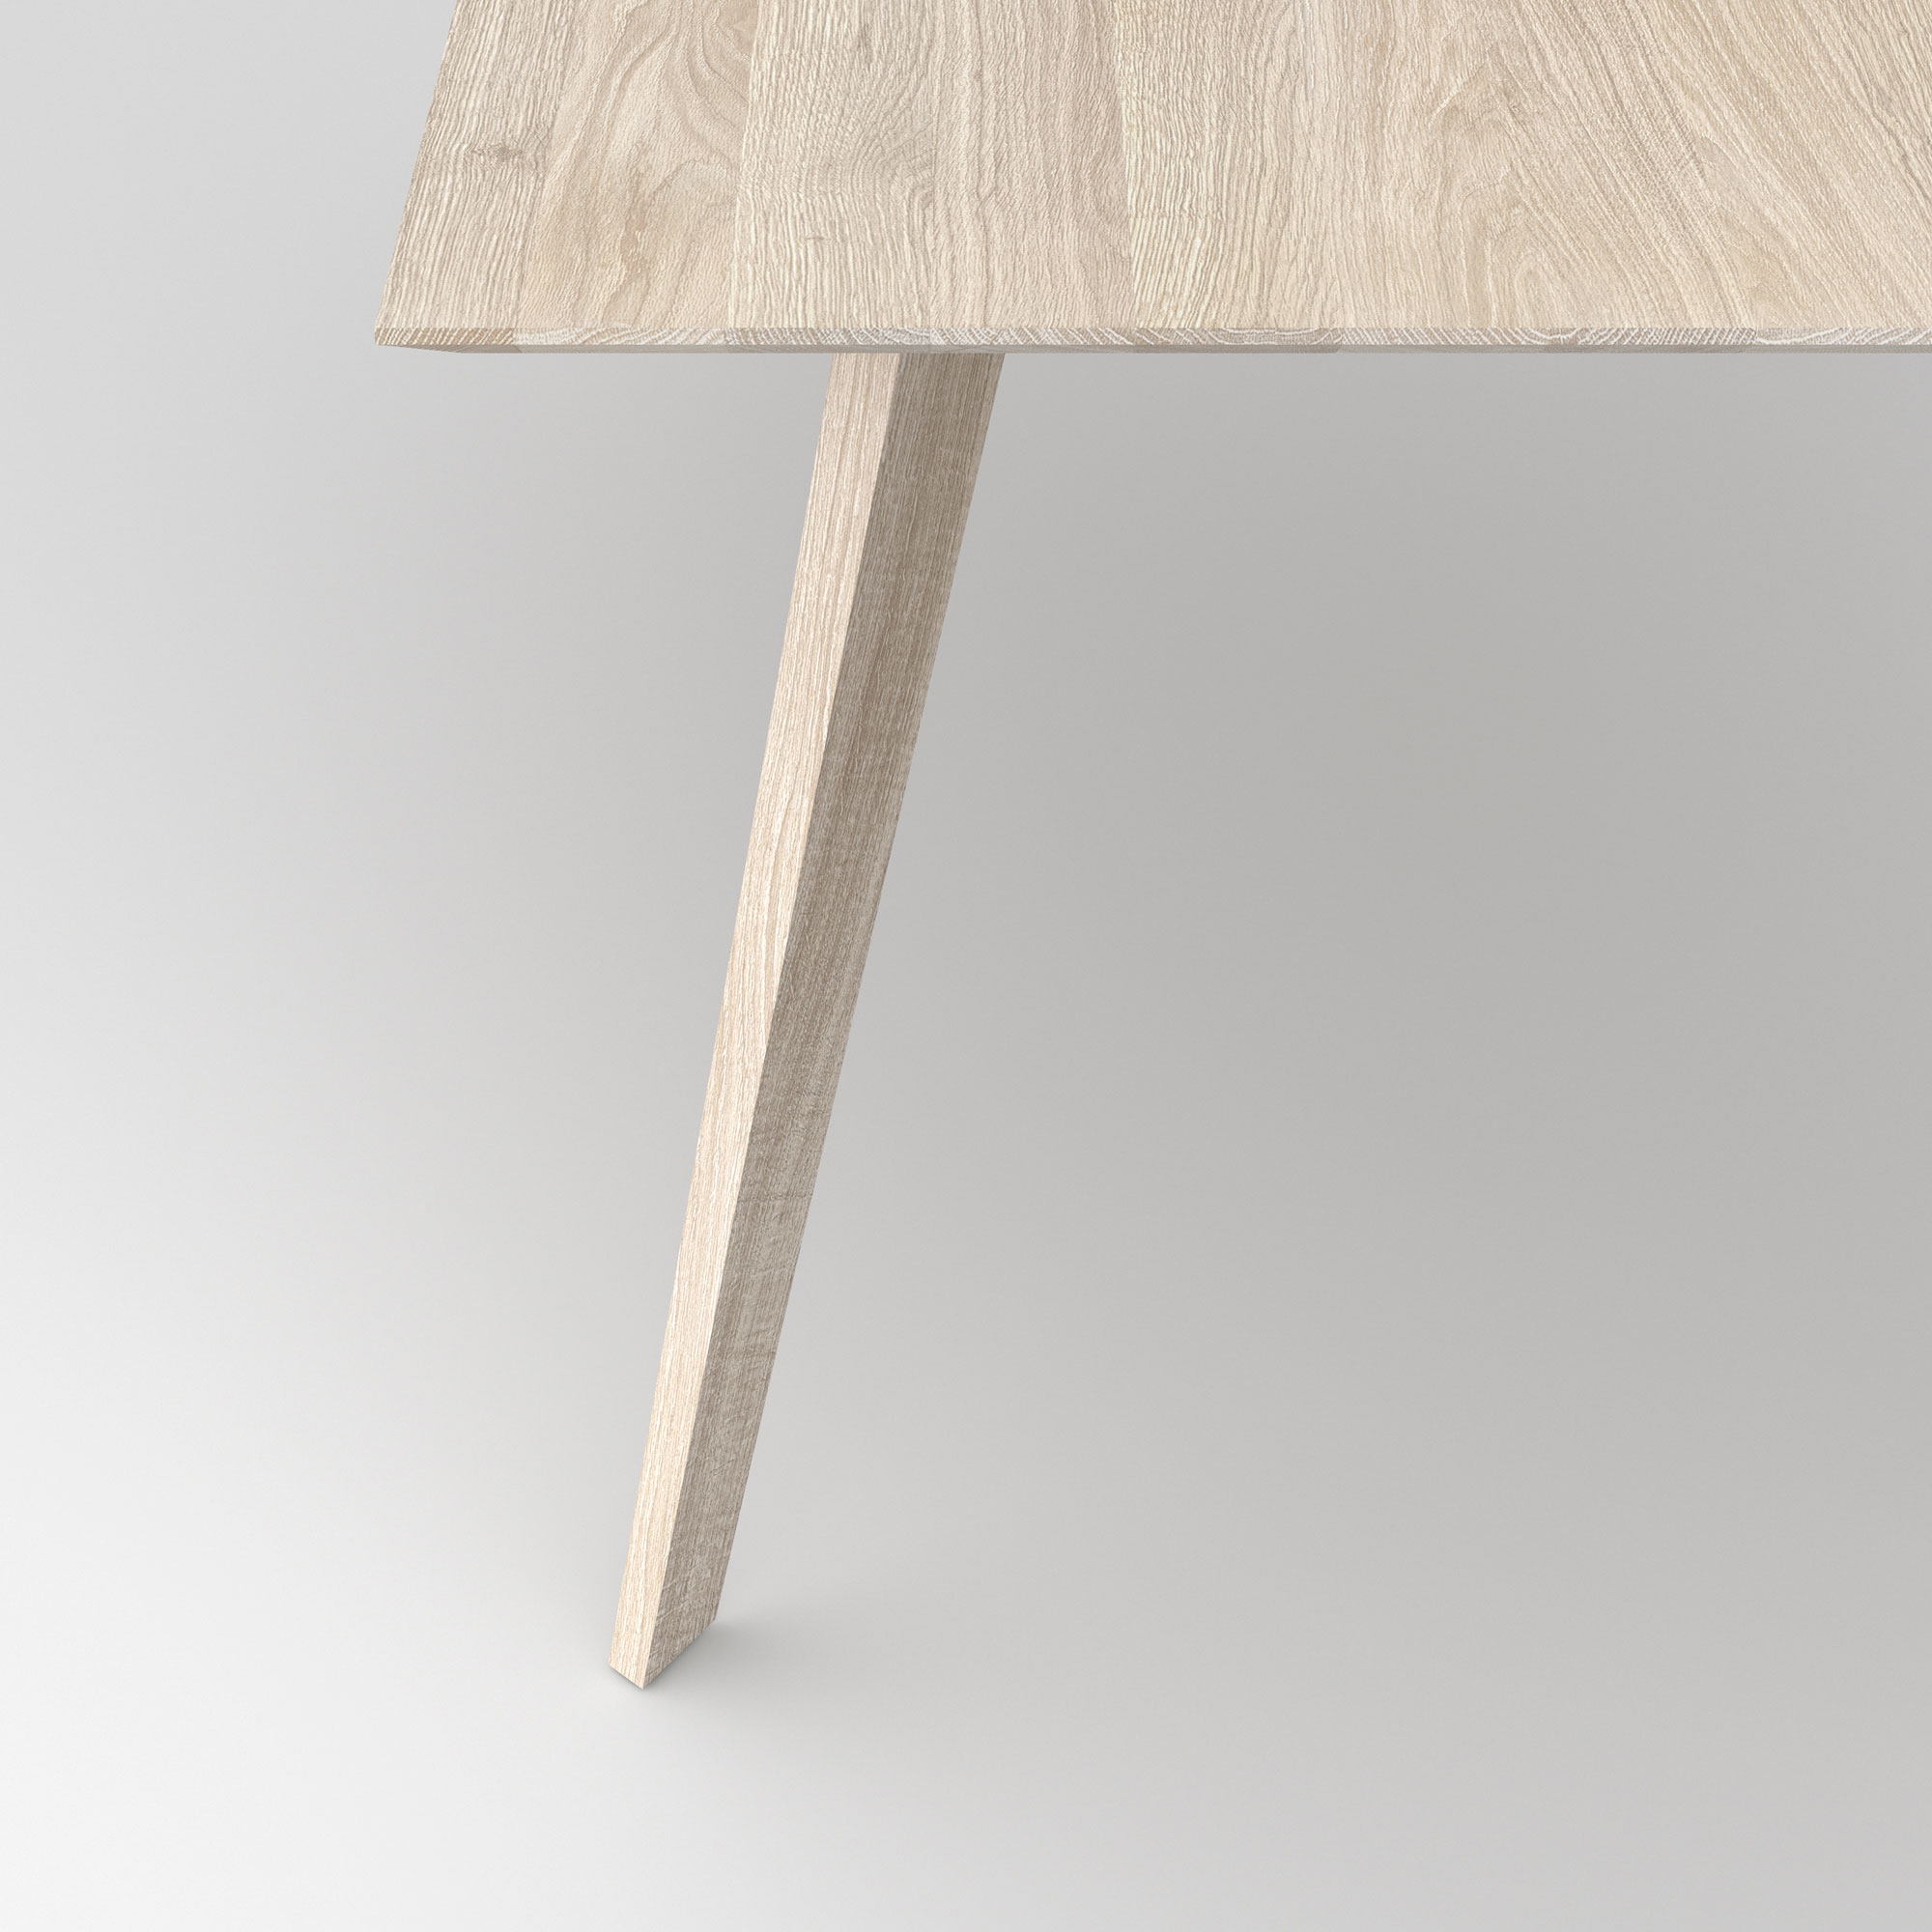 Solid Wood Dining Table CITIUS cam4 custom made in solid wood by vitamin design